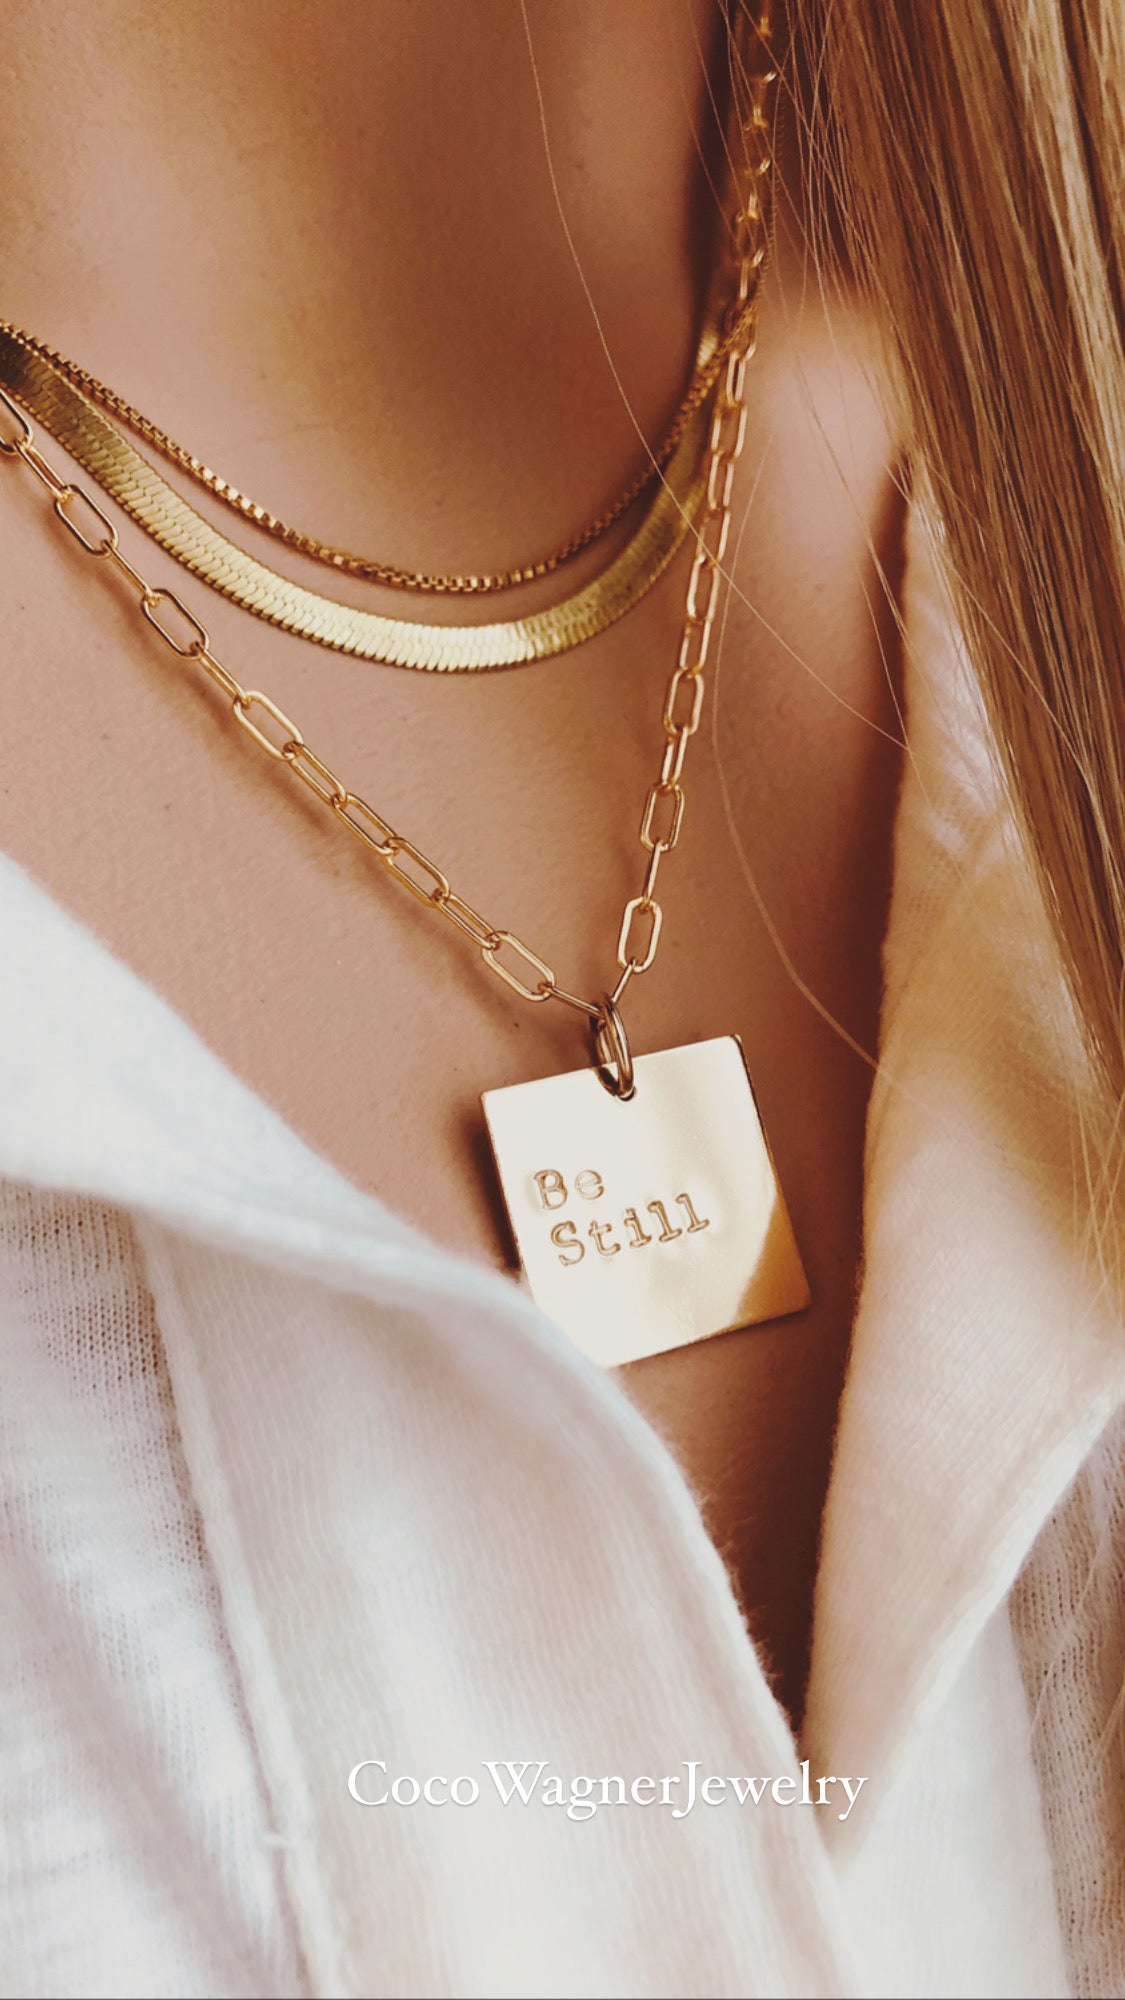 Personalized Necklace, Long Necklace, Hand Stamped Jewelry, Square Necklace, Statement Necklcae, Monogram and Name Jewelry